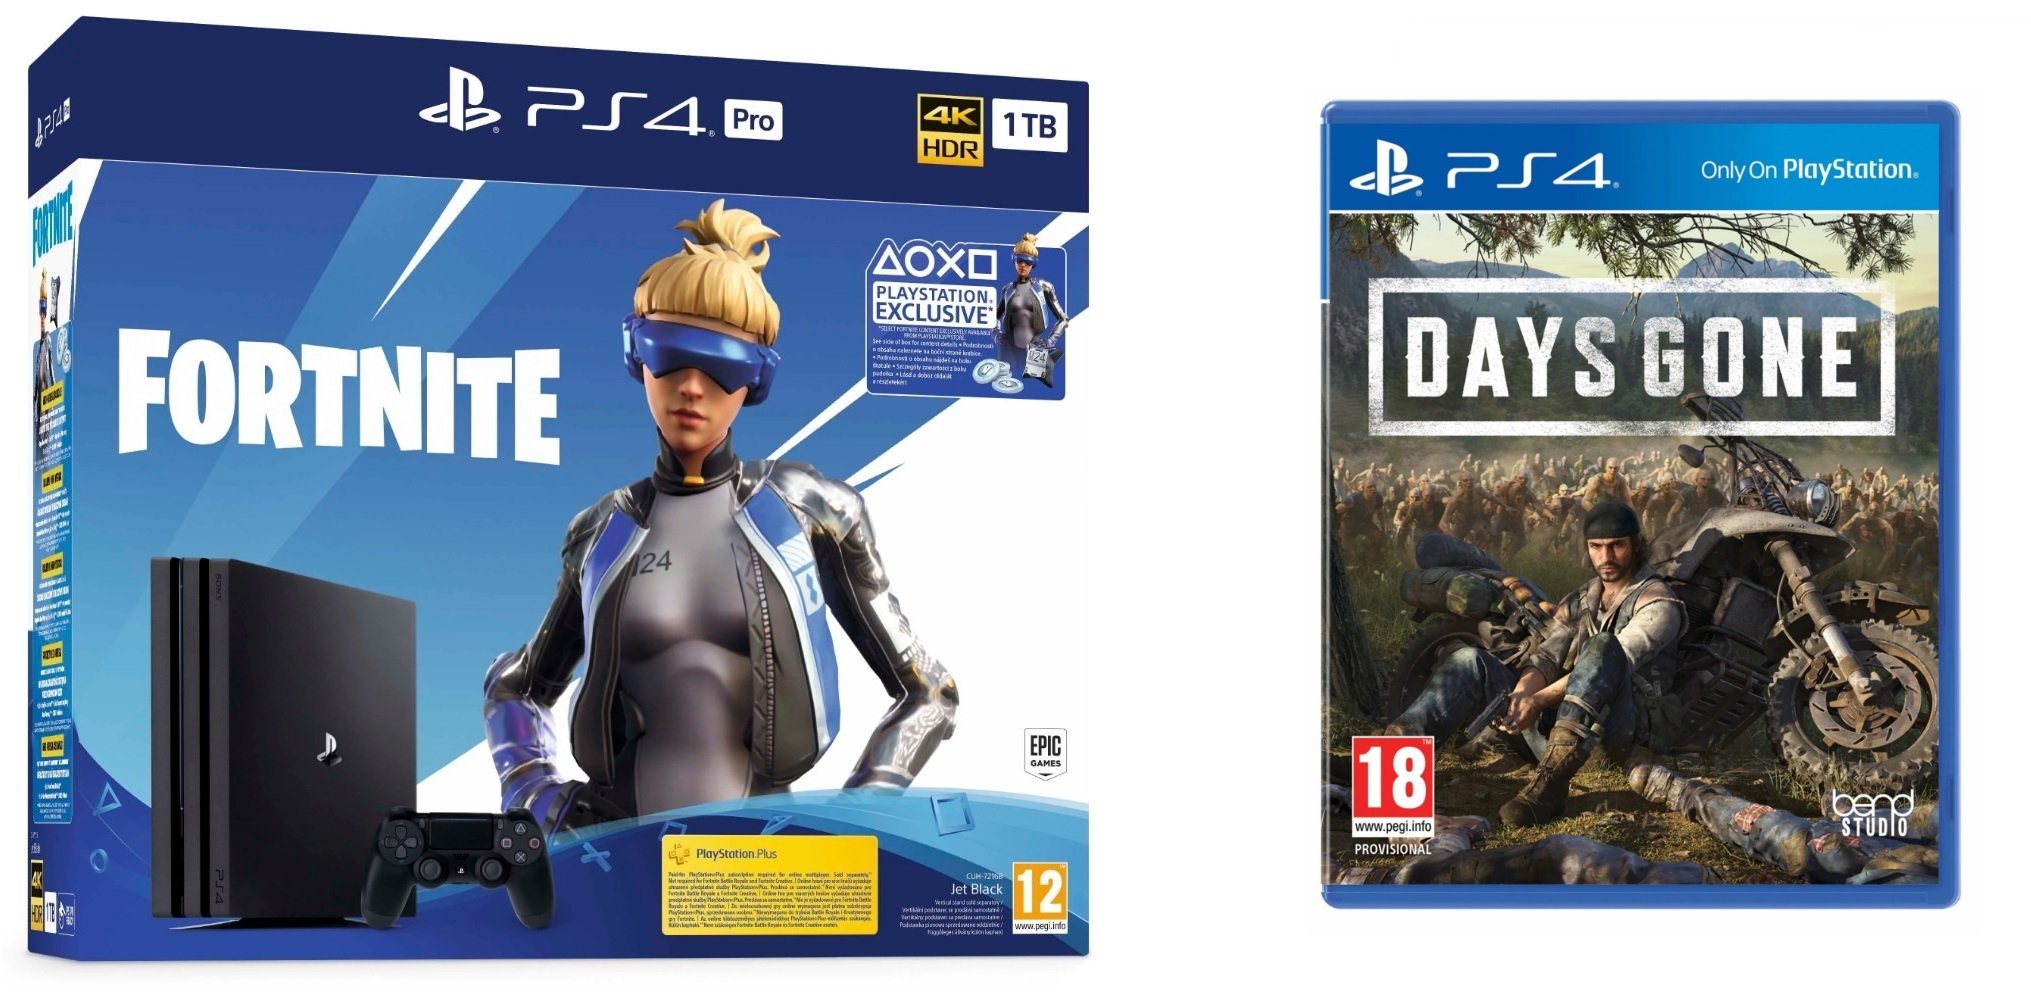 Minimer Quilt Bourgeon Køb Playstation 4 Pro Console - 1 TB (Fortnite Bundle) (Nordic) + Days Gone  (Fornite Code Expired) (Nordic)